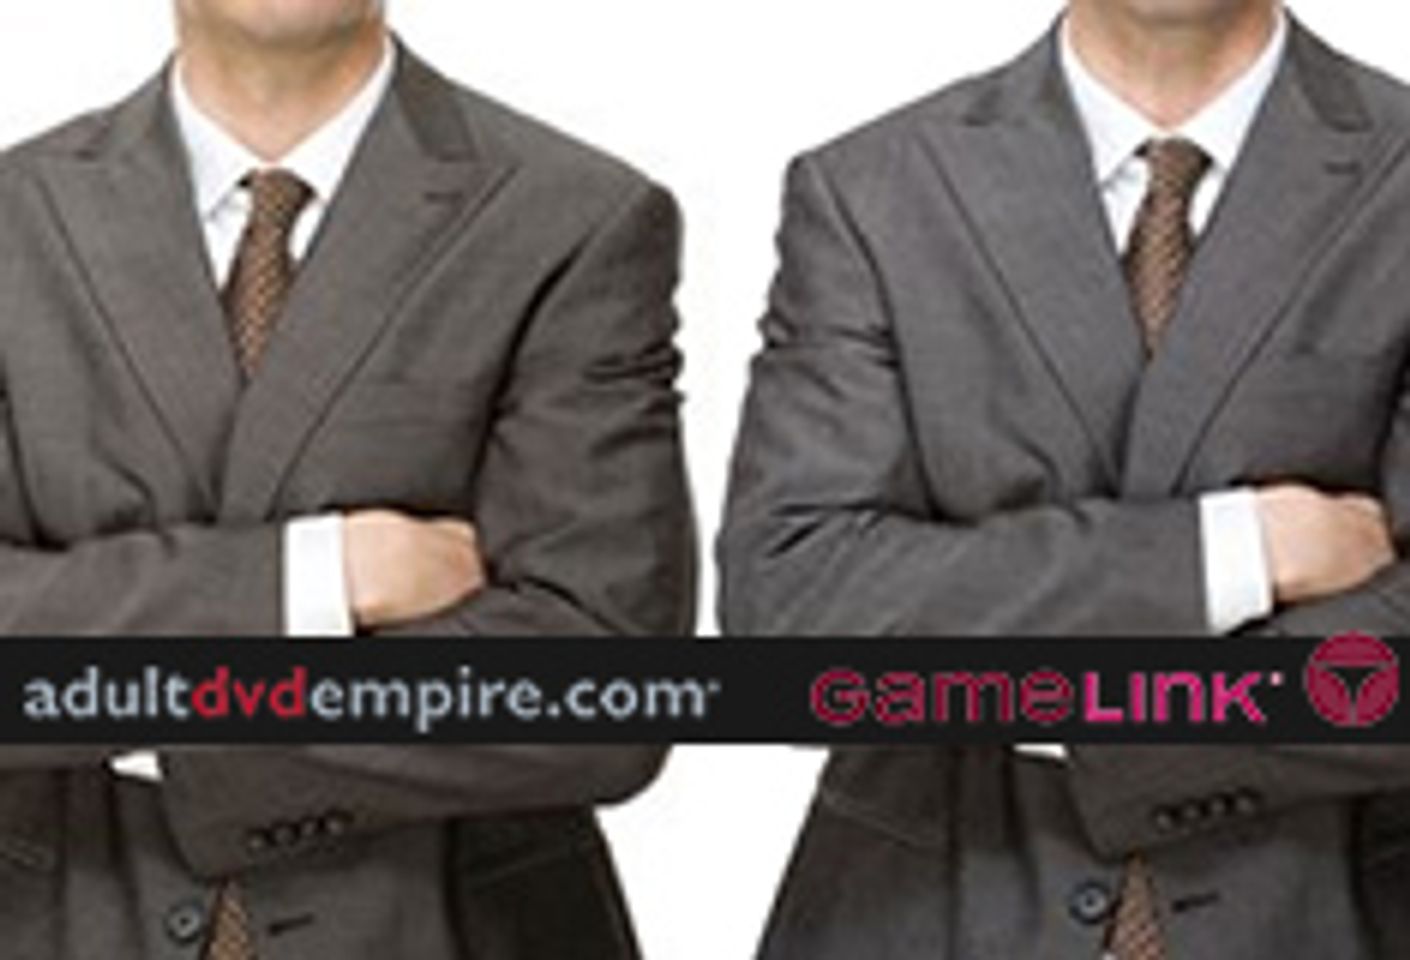 Gamelink, Adult DVD Empire Oppose VOD Exclusives